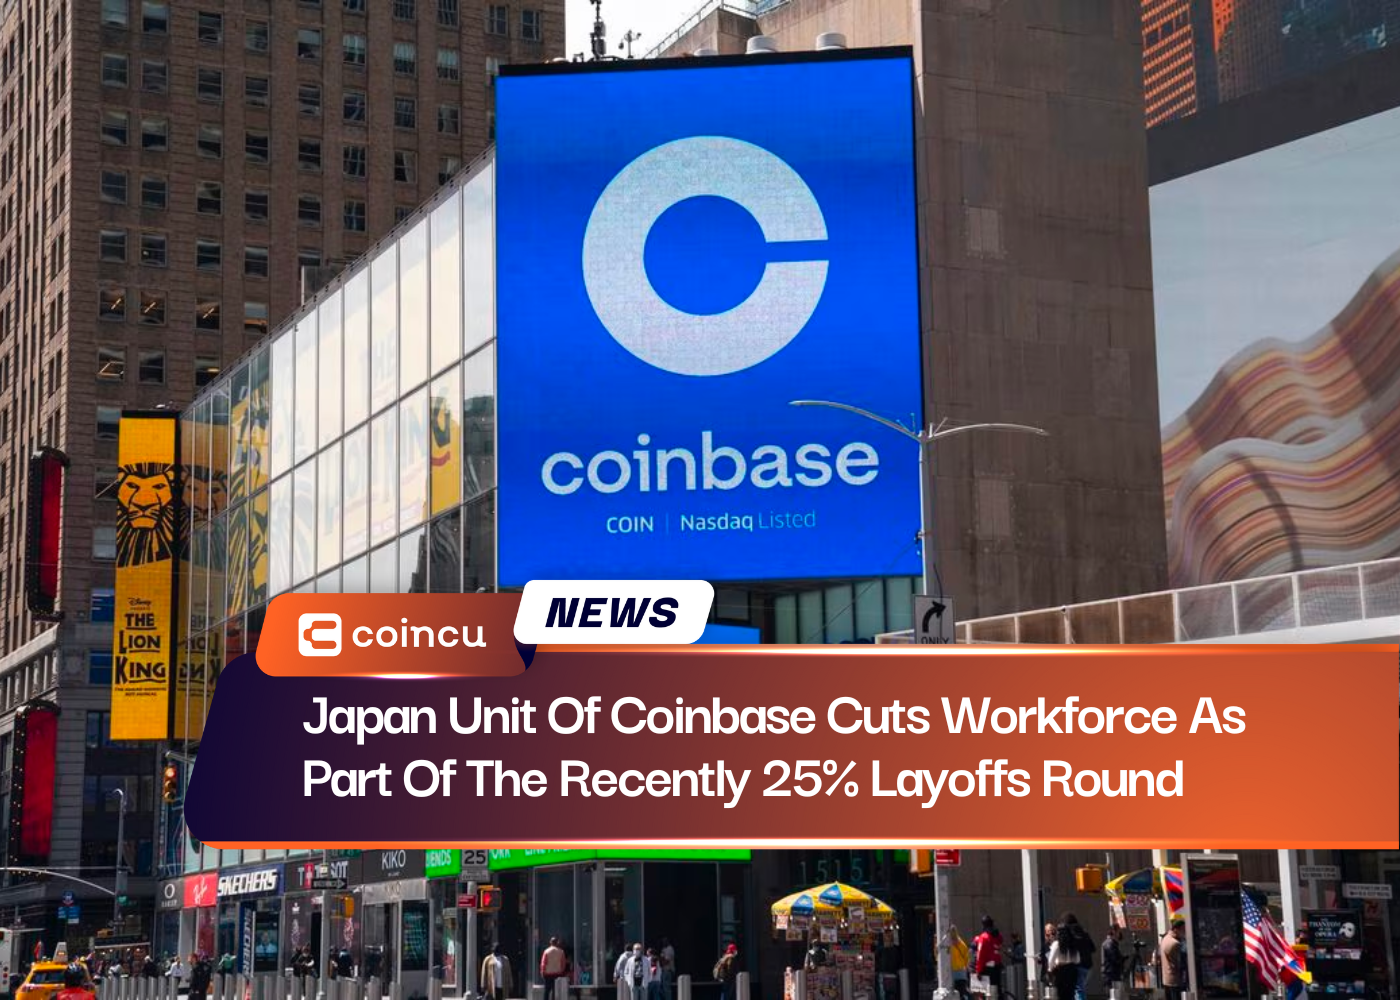 Japan Unit Of Coinbase Cuts Workforce As Part Of The Recently 25% Layoffs Round